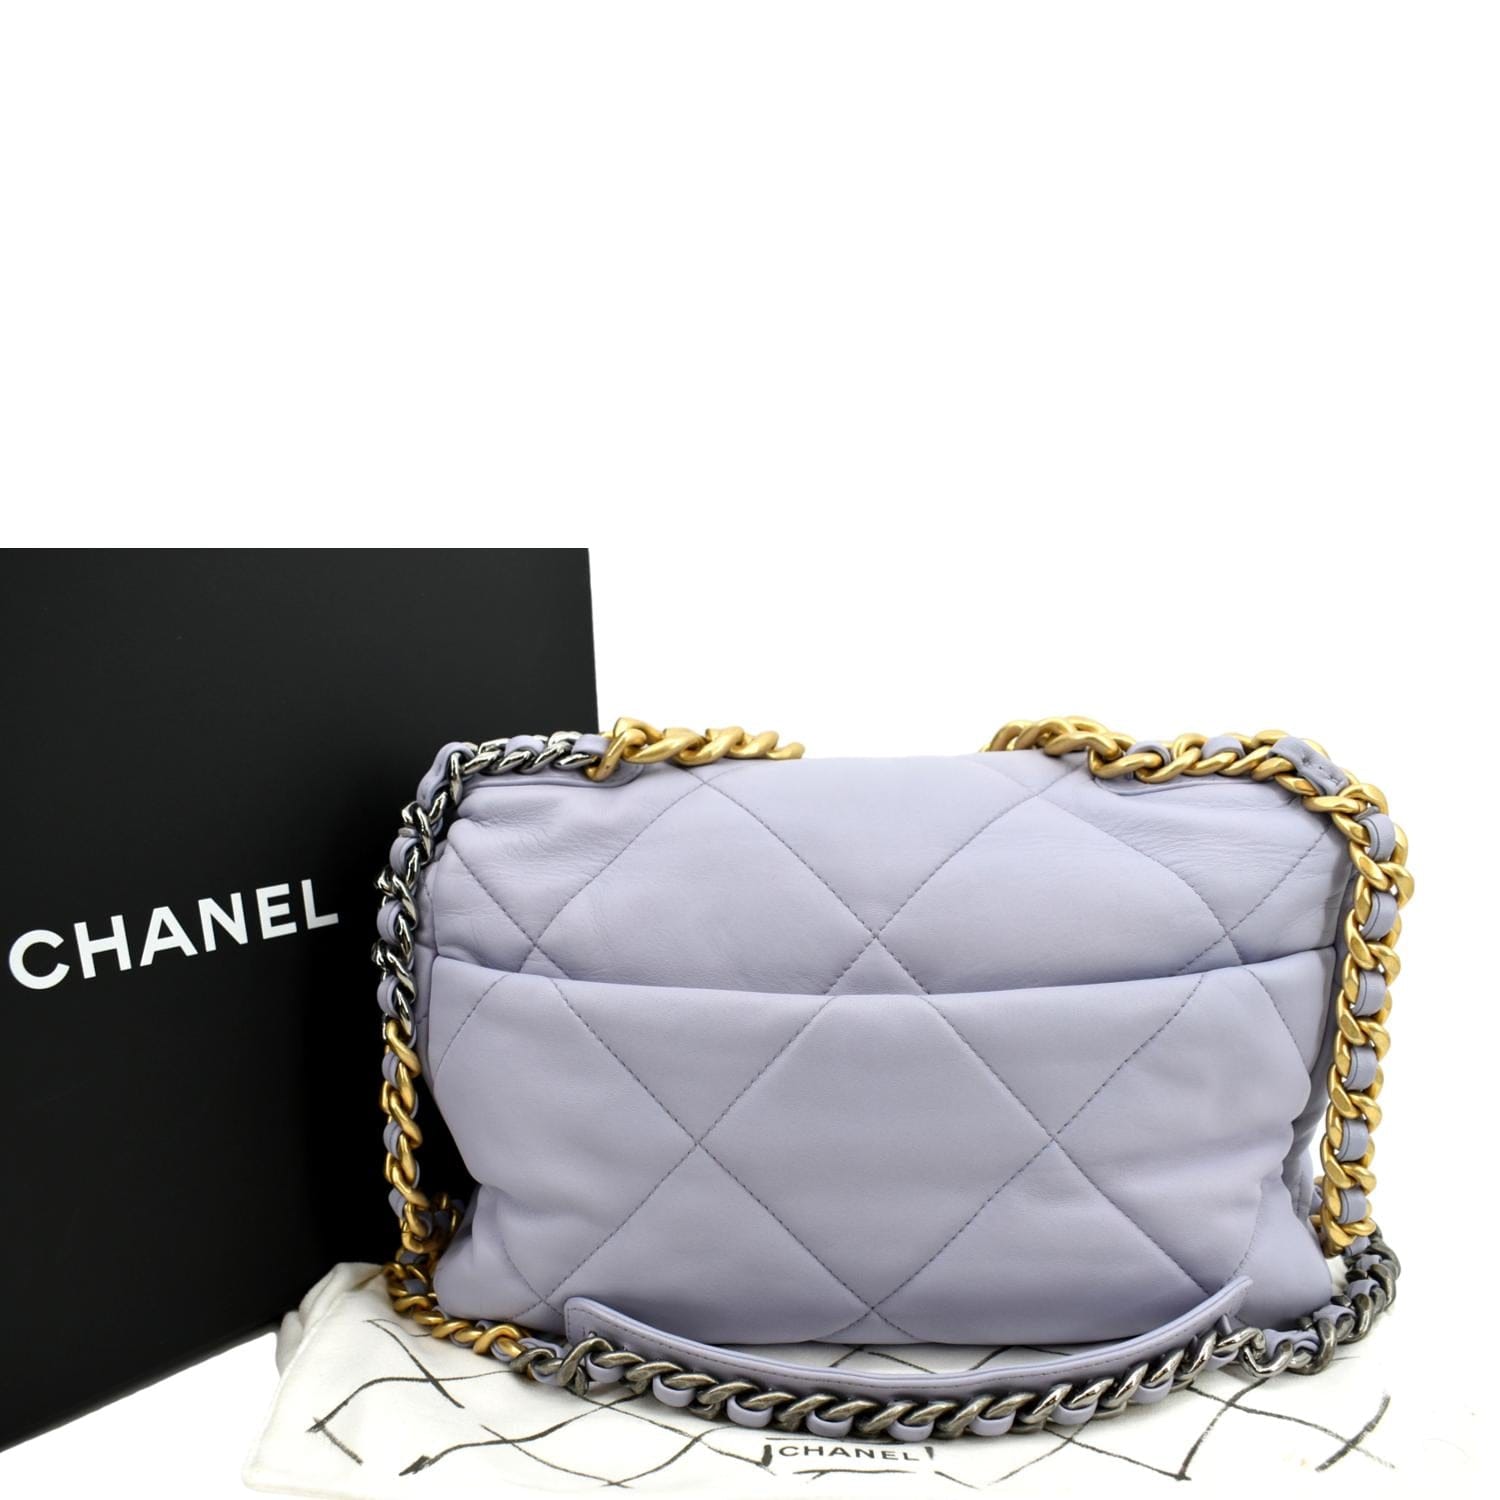 Chanel 19 Large Flap Bag Quilted Lambskin - Light Blue